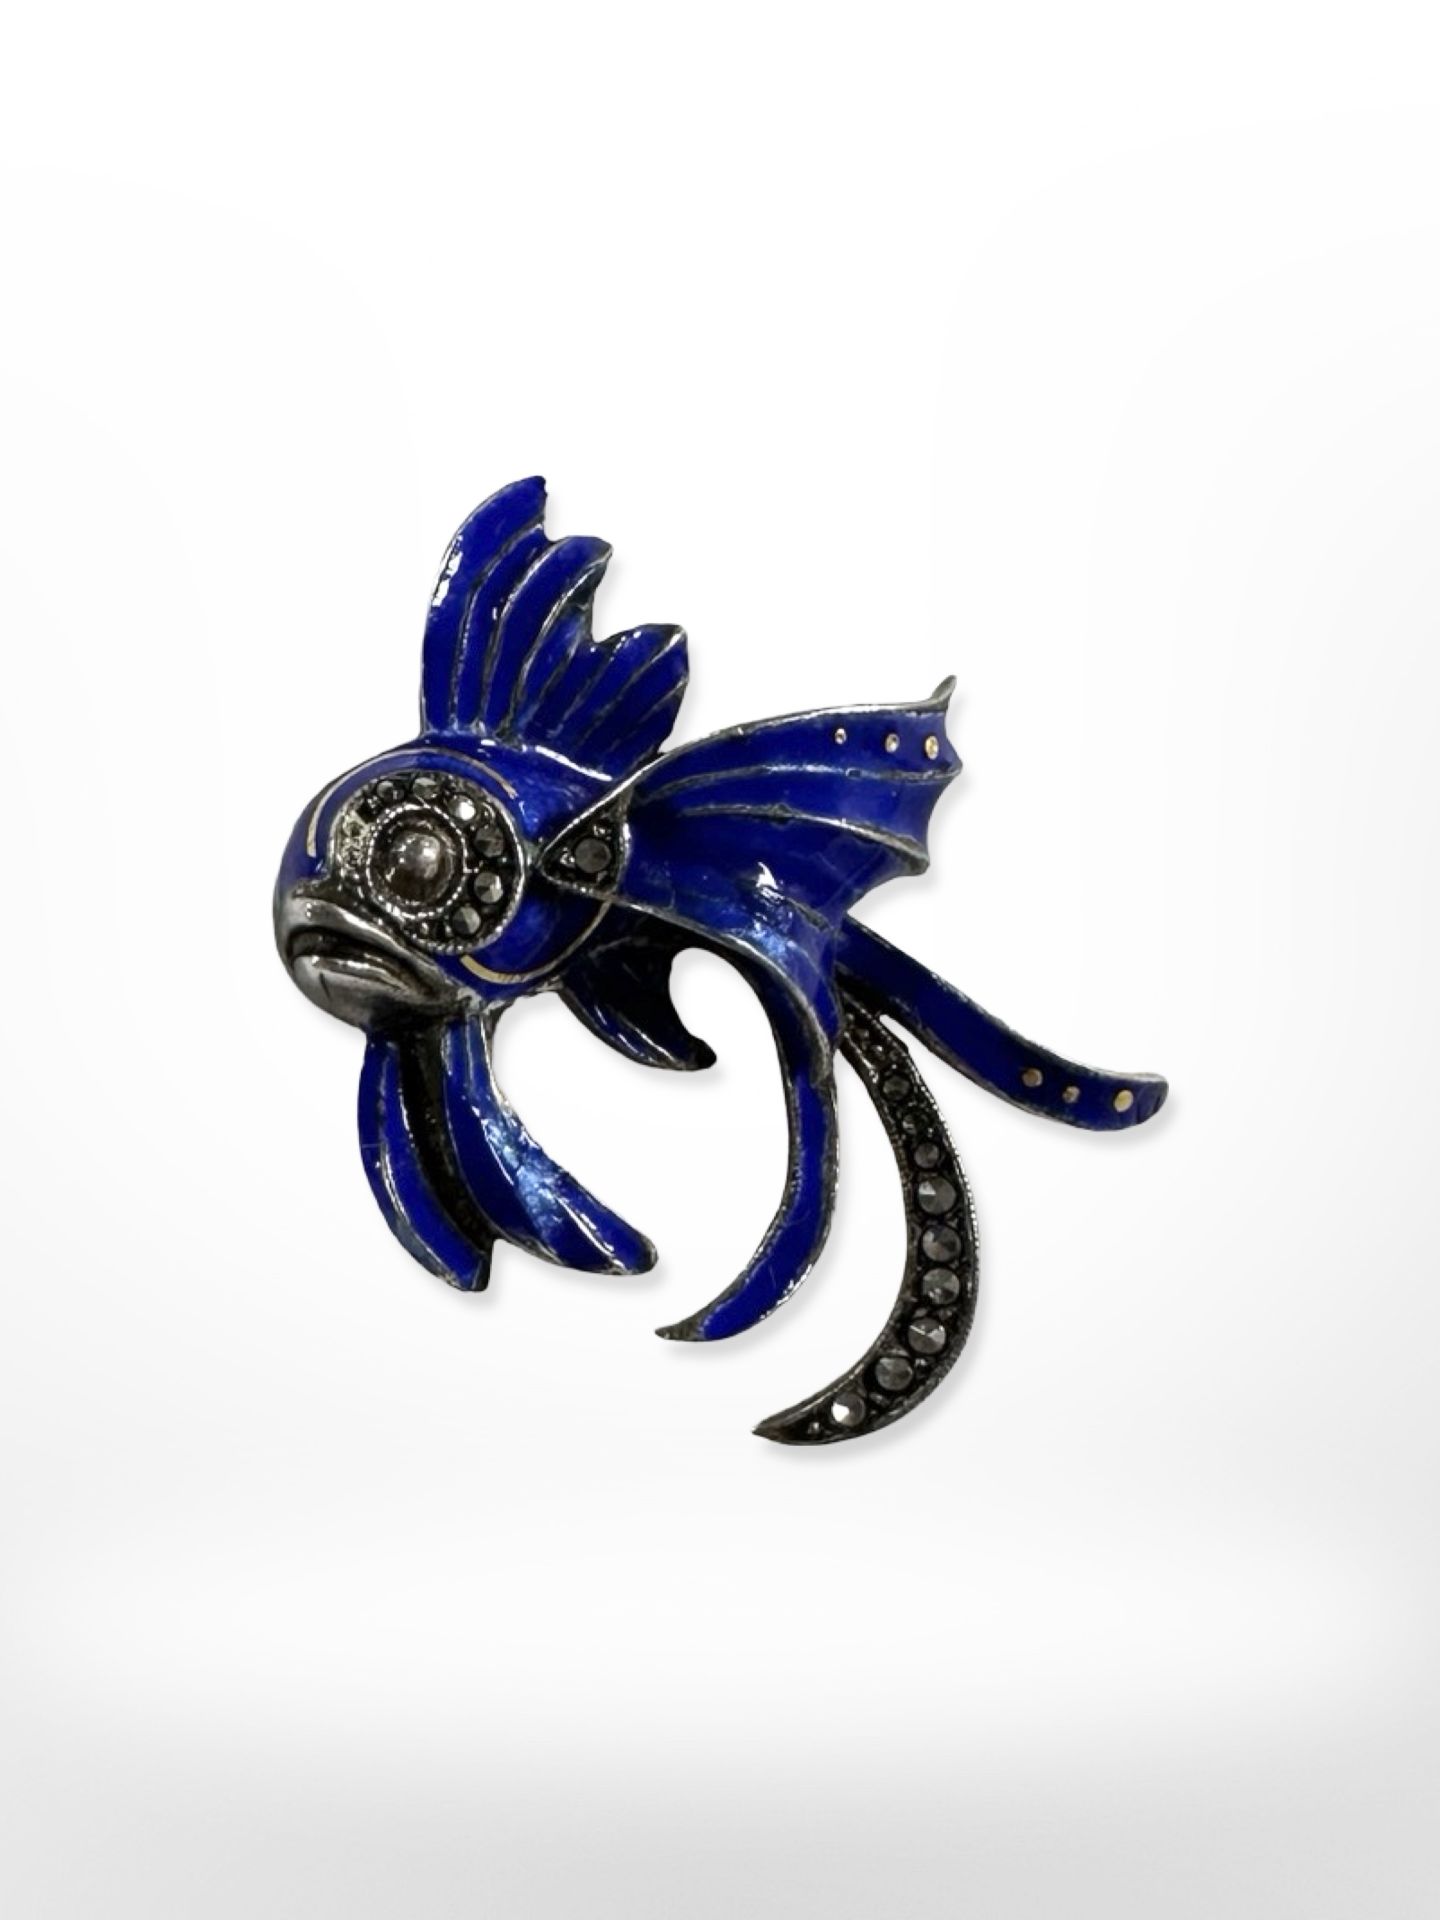 A Sterling silver blue enamel and marcasite brooch modelled as a tropical fish, width 35 mm.